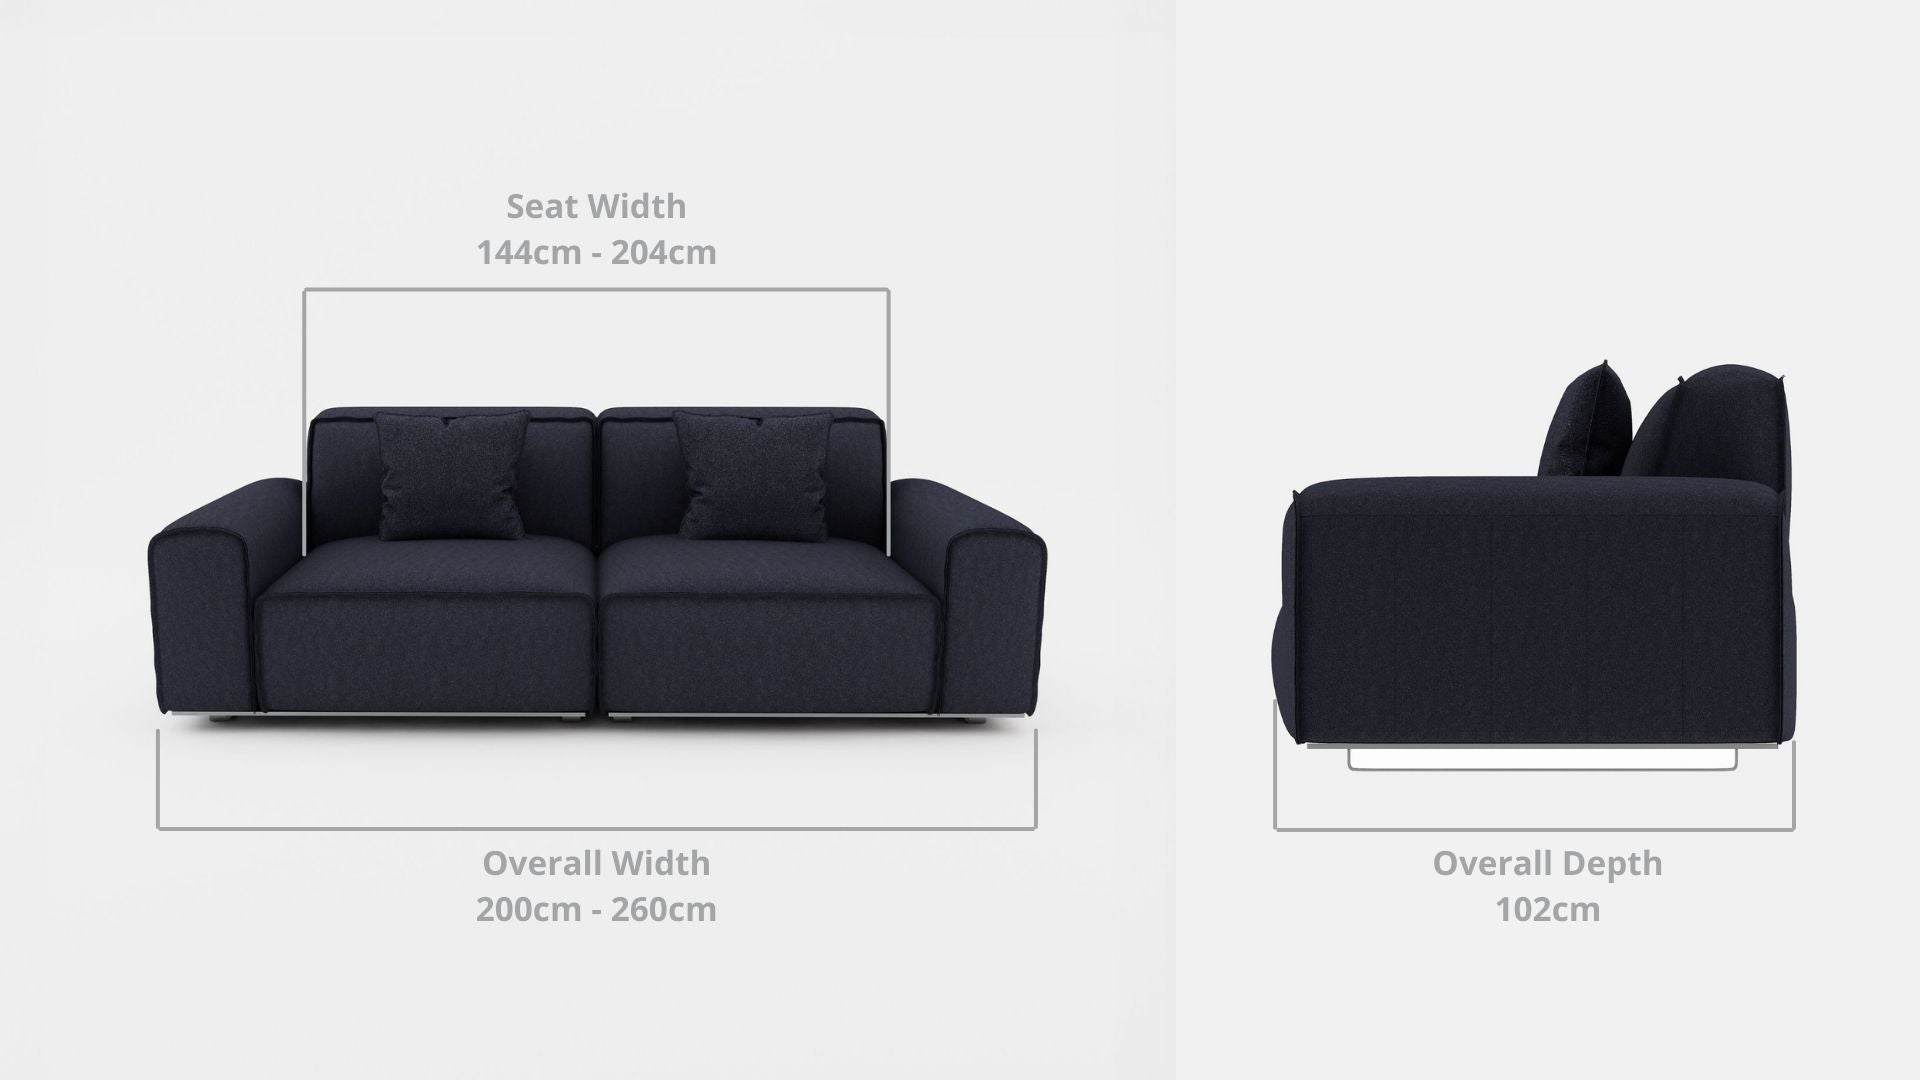 Details the key dimensions in terms of overall width, overall depth and seat width for Colby Fabric Sofa